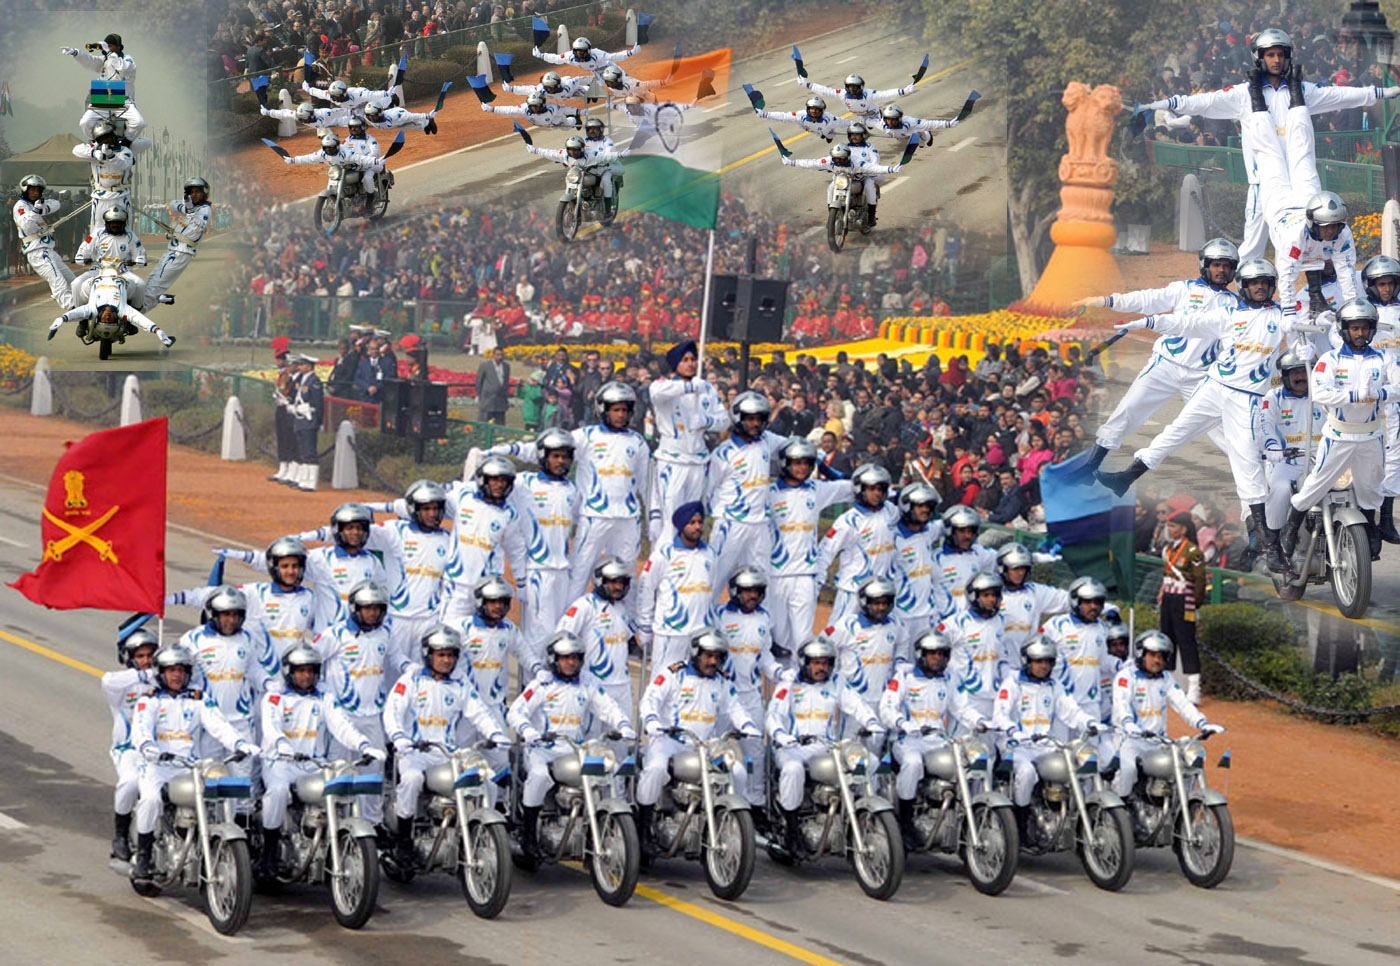 Motorbike riders of Corps of Signals, on the occasion of the 67th Republic Day Parade